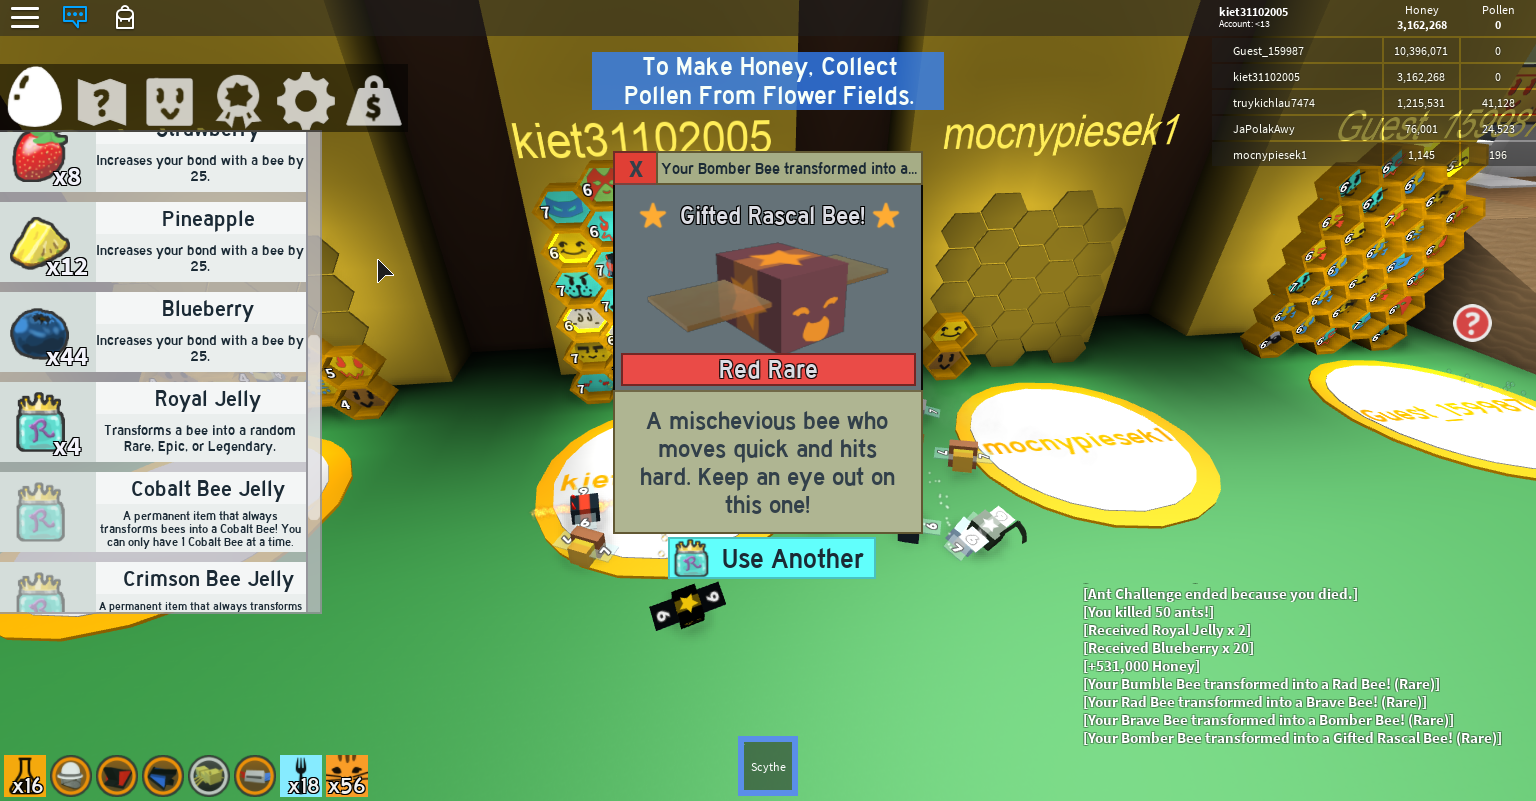 Codes For Roblox On Bee Swarm Simulator